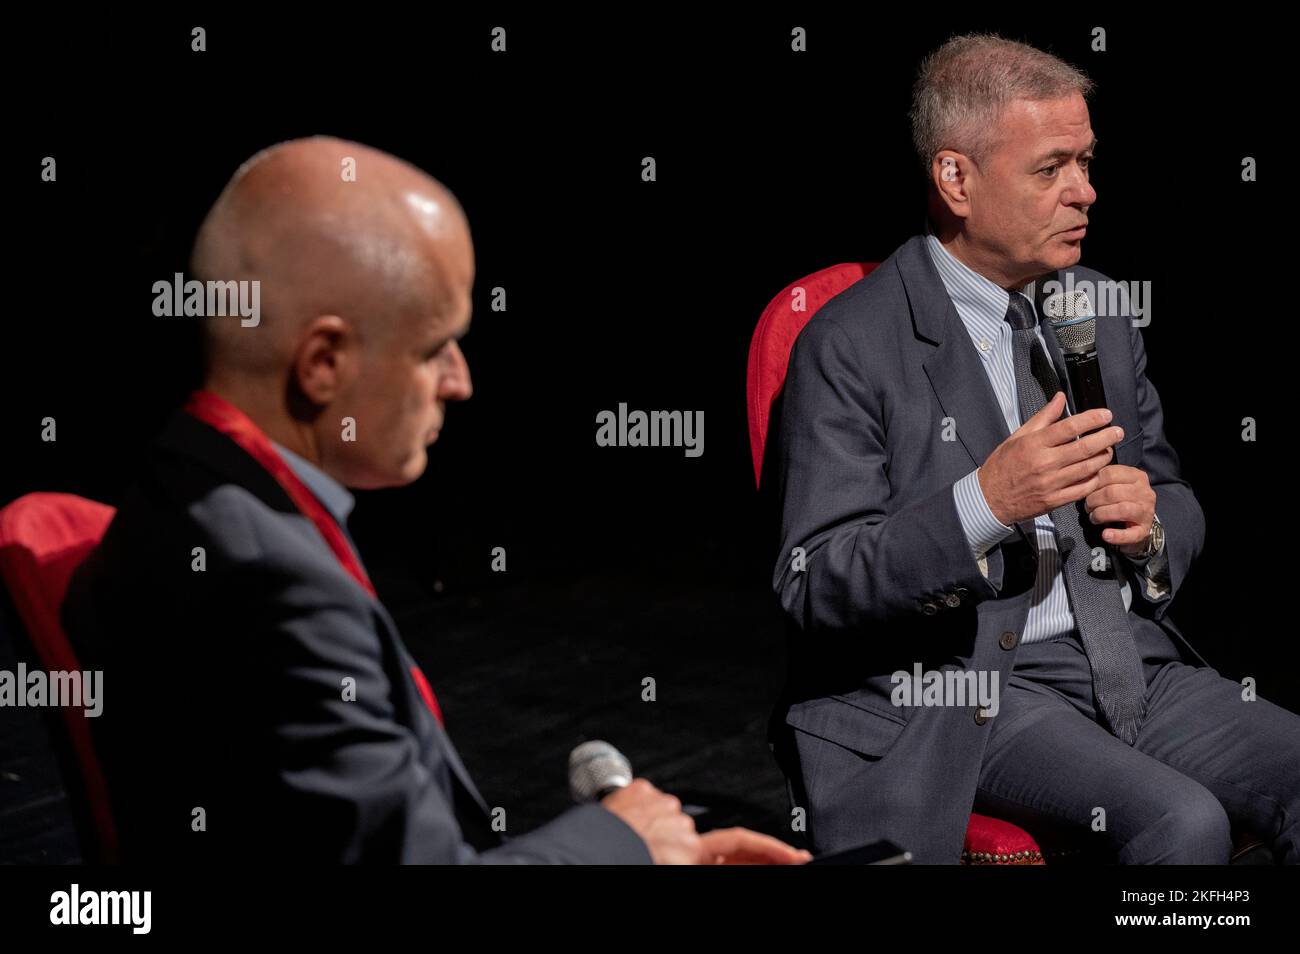 Cuneo, Italy. 18th November 2022. The editor of the national newspaper 'La Stampa', Massimo Mathis (on the left), interviews the journalist and writer Ezio Mauro, former editor of the Italian newspaper 'La Repubblica', on the Teatro Toselli stage in Cuneo on the occasion of the Scrittorincittà Festival . Credit: Luca Prestia / Alamy Live News Stock Photo